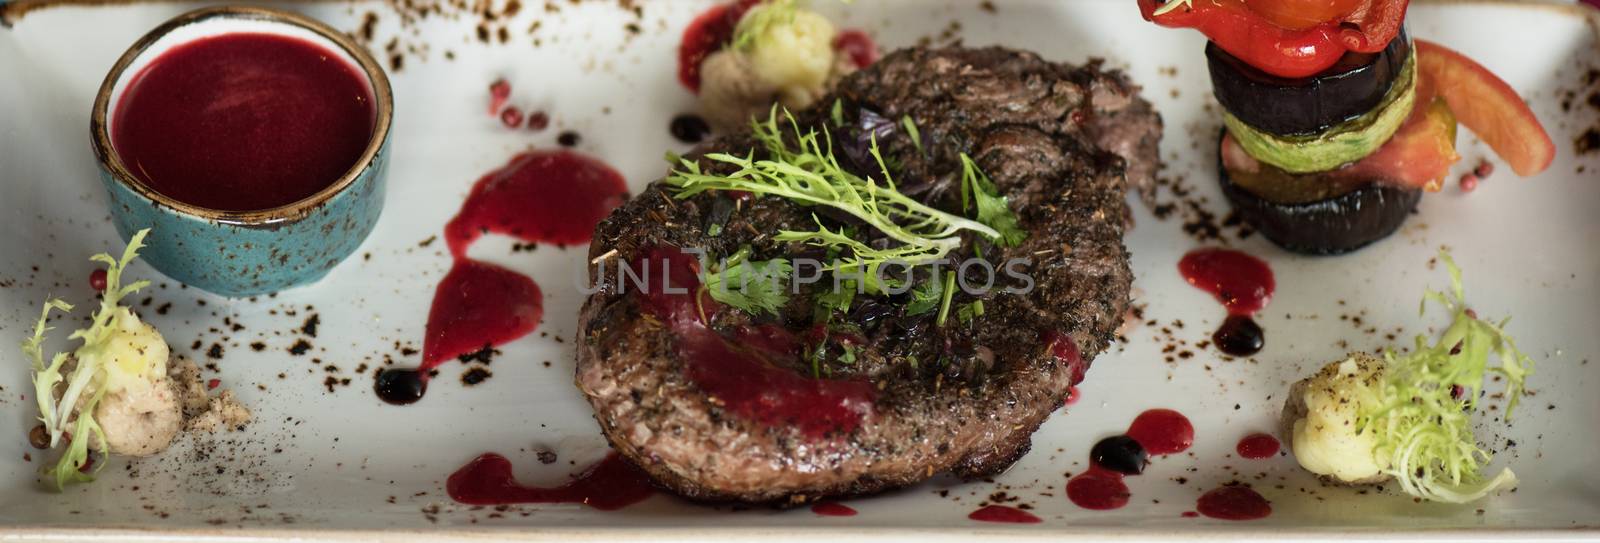 grilled beef steak with herbs vegetables and sauce